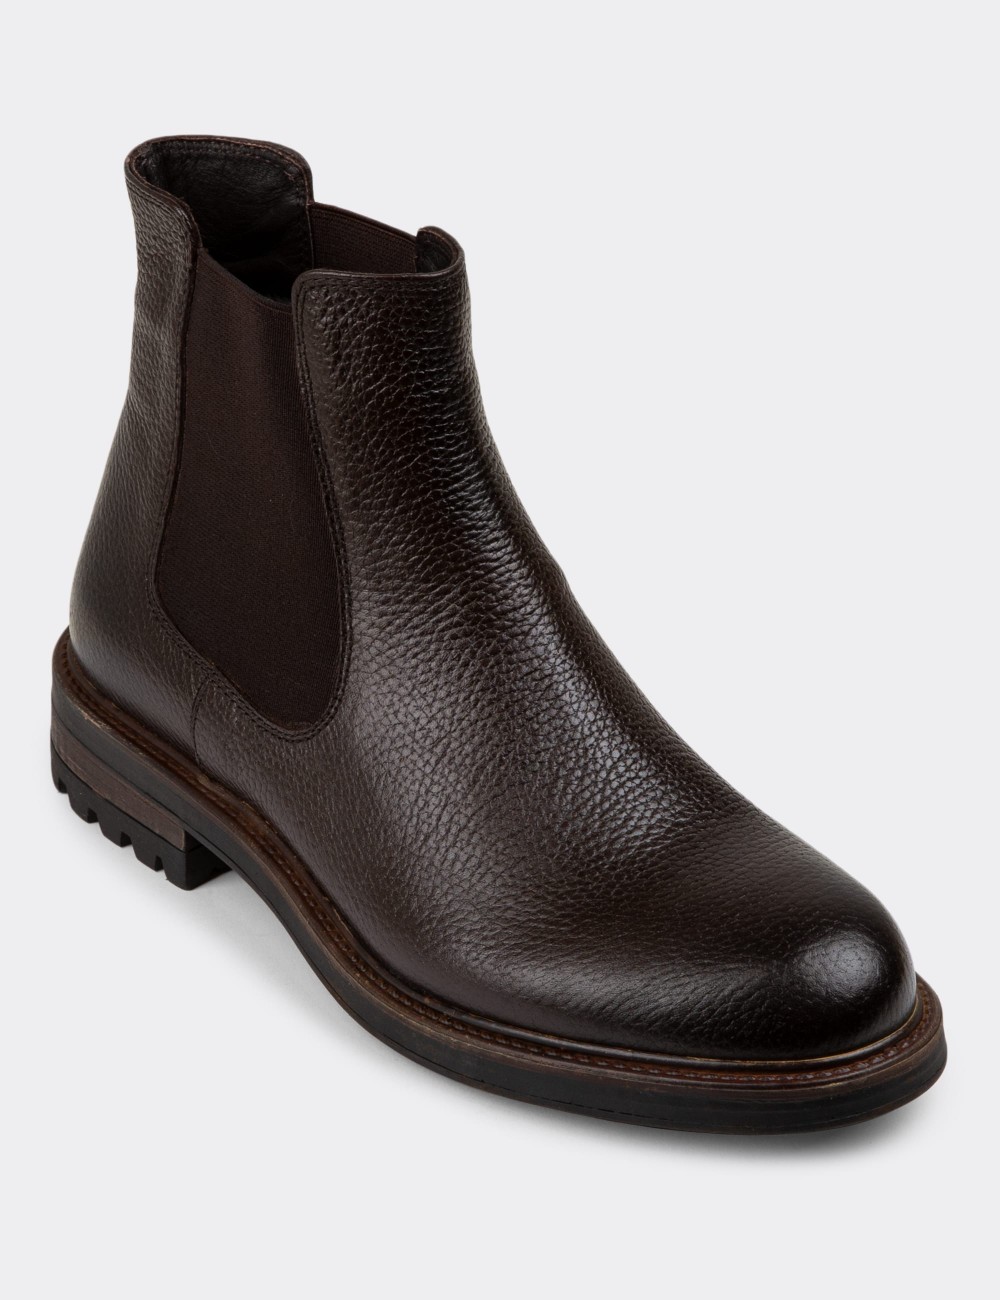 Brown Leather Chelsea Boots - 01620MKHVC32